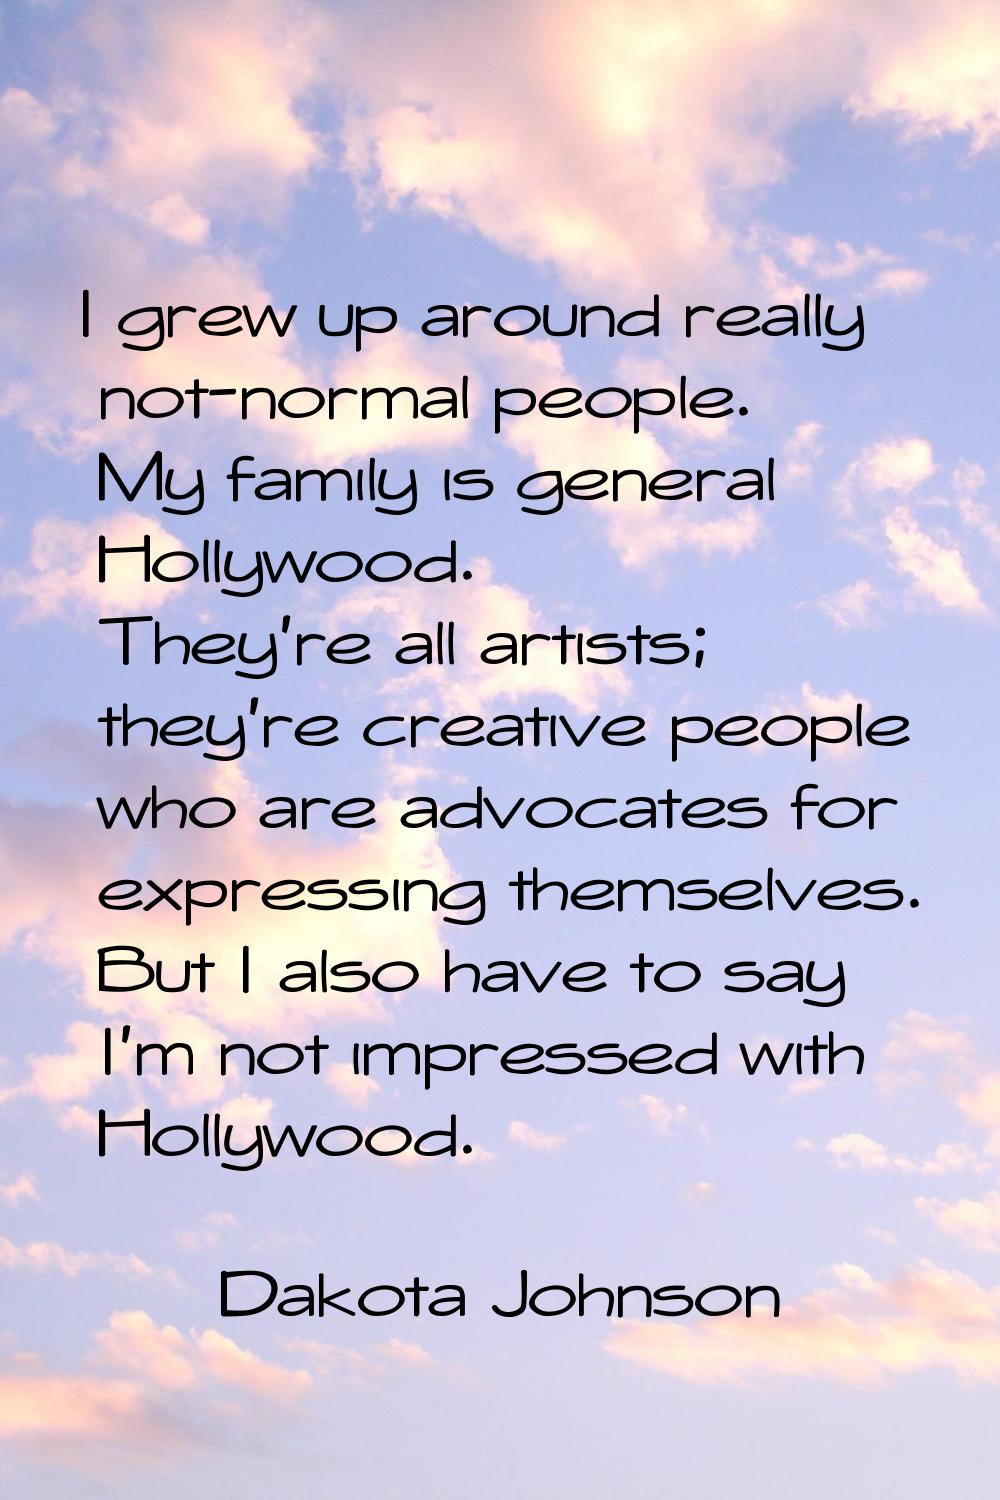 I grew up around really not-normal people. My family is general Hollywood. They're all artists; the